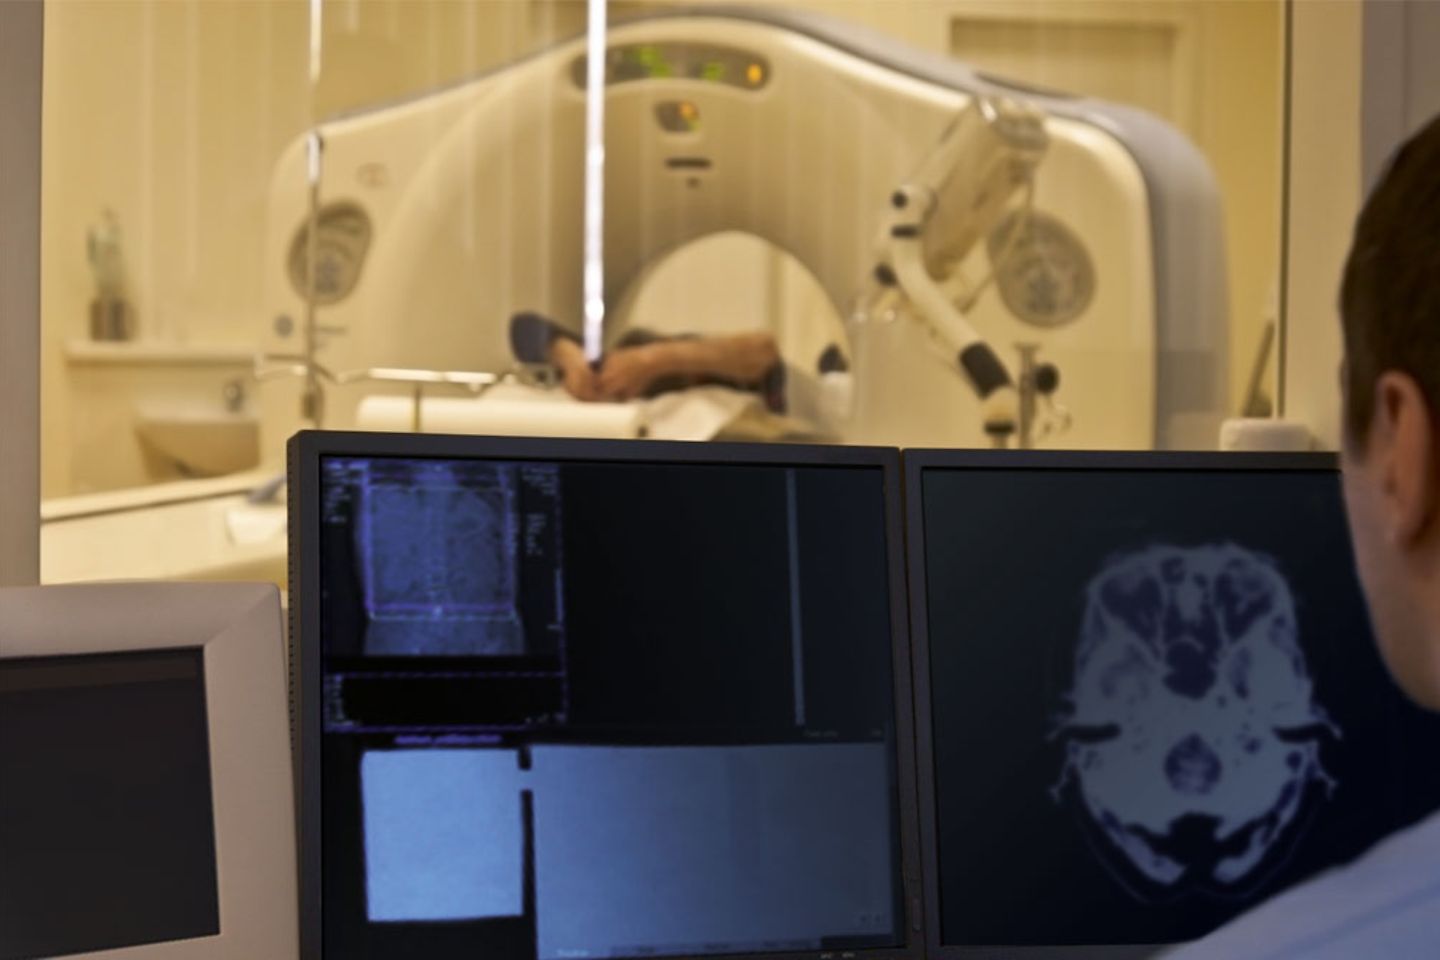 Person with white gown in the foreground works on scan data at a PC screen; in the background an MRI can be seen.